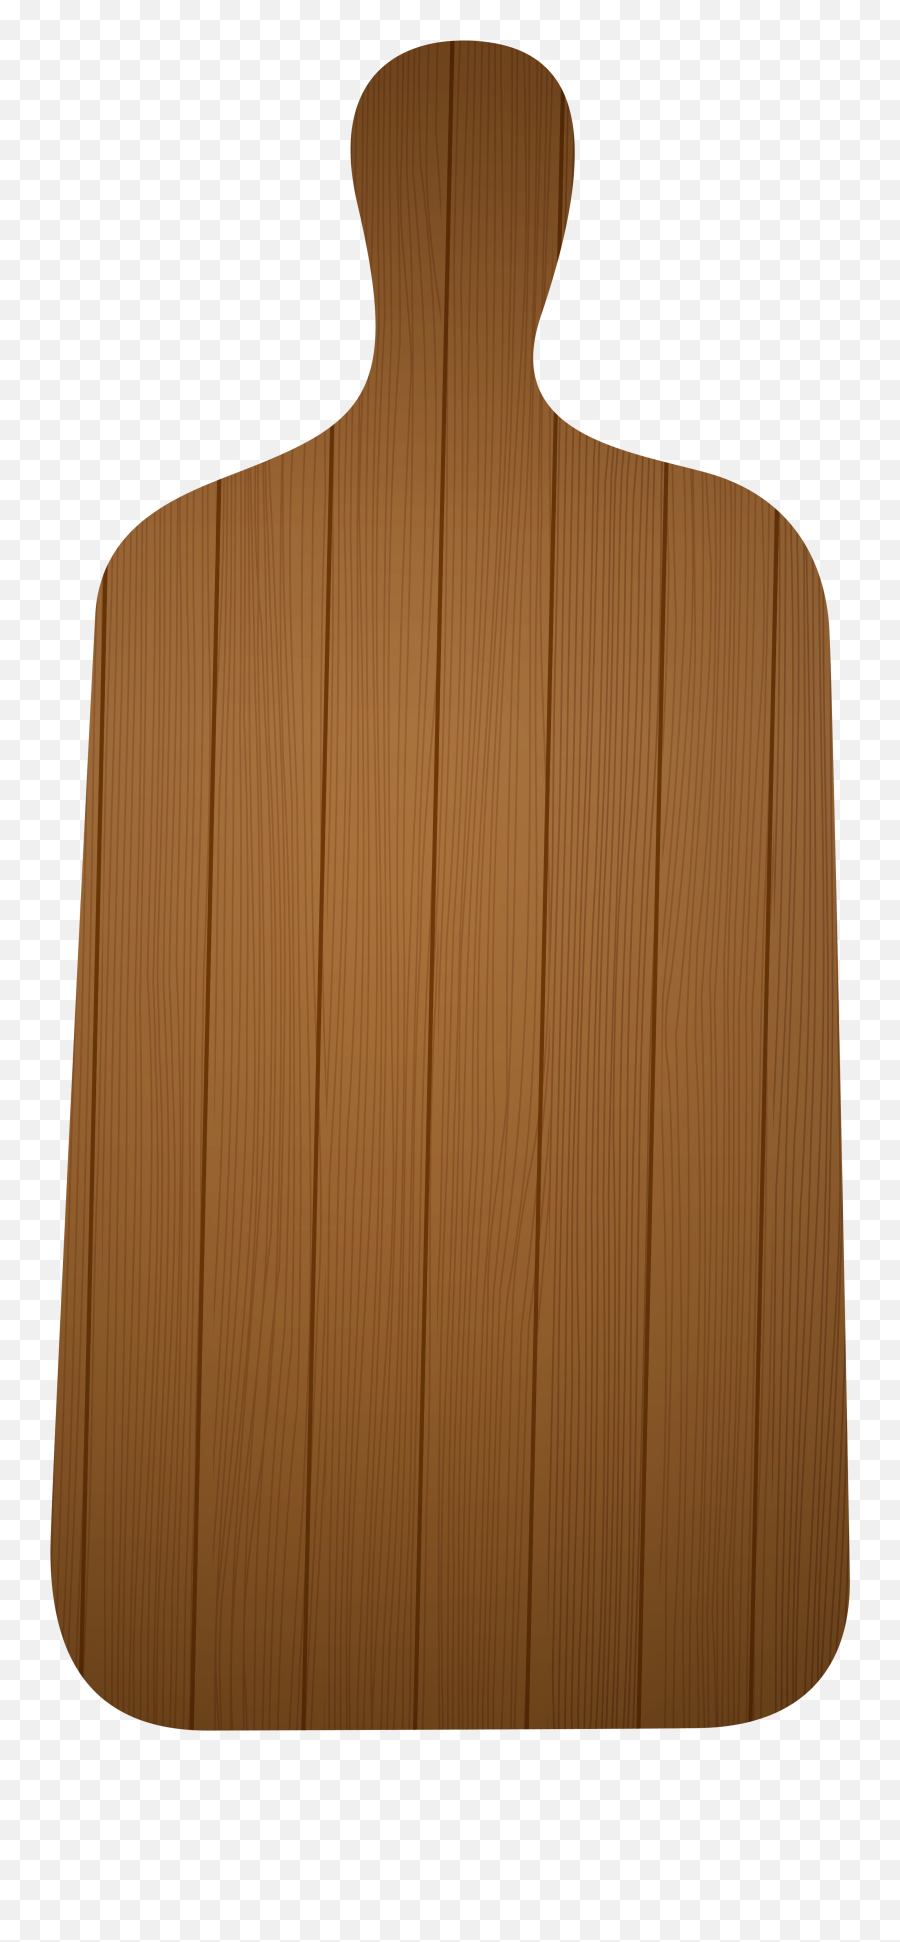 Download Hd Wooden Cutting Boards Png - Wooden Cutting Board Clipart,Cutting Board Png